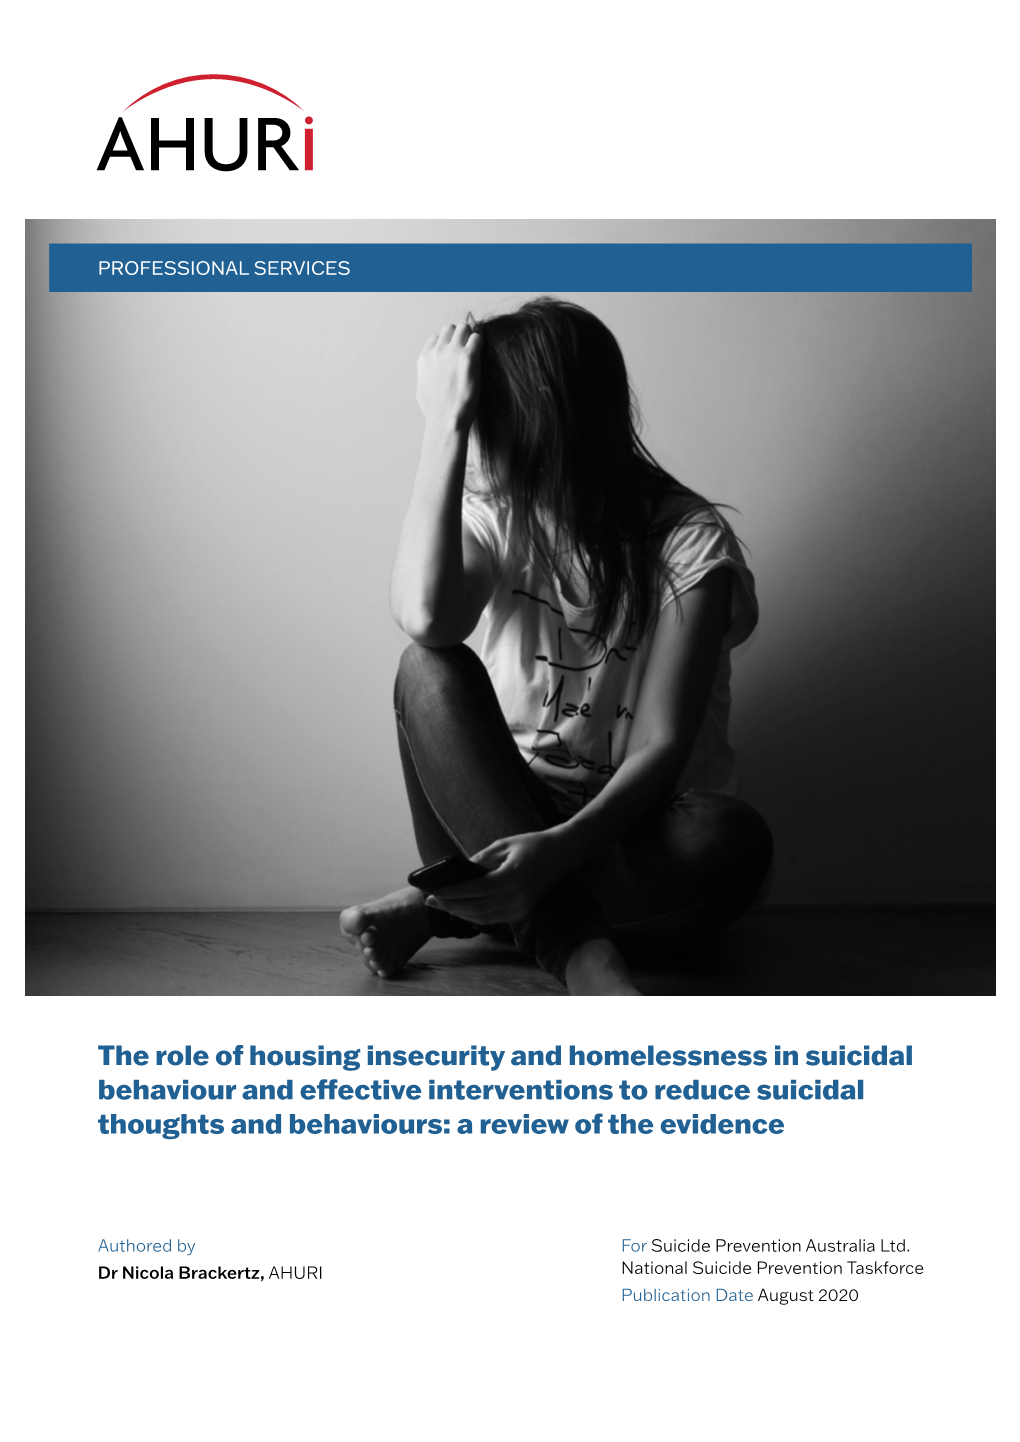 The Role of Housing Insecurity and Homelessness in Suicidal Behaviour and Effective Interventions to Reduce Suicidal Thoughts and Behaviours: a Review of the Evidence